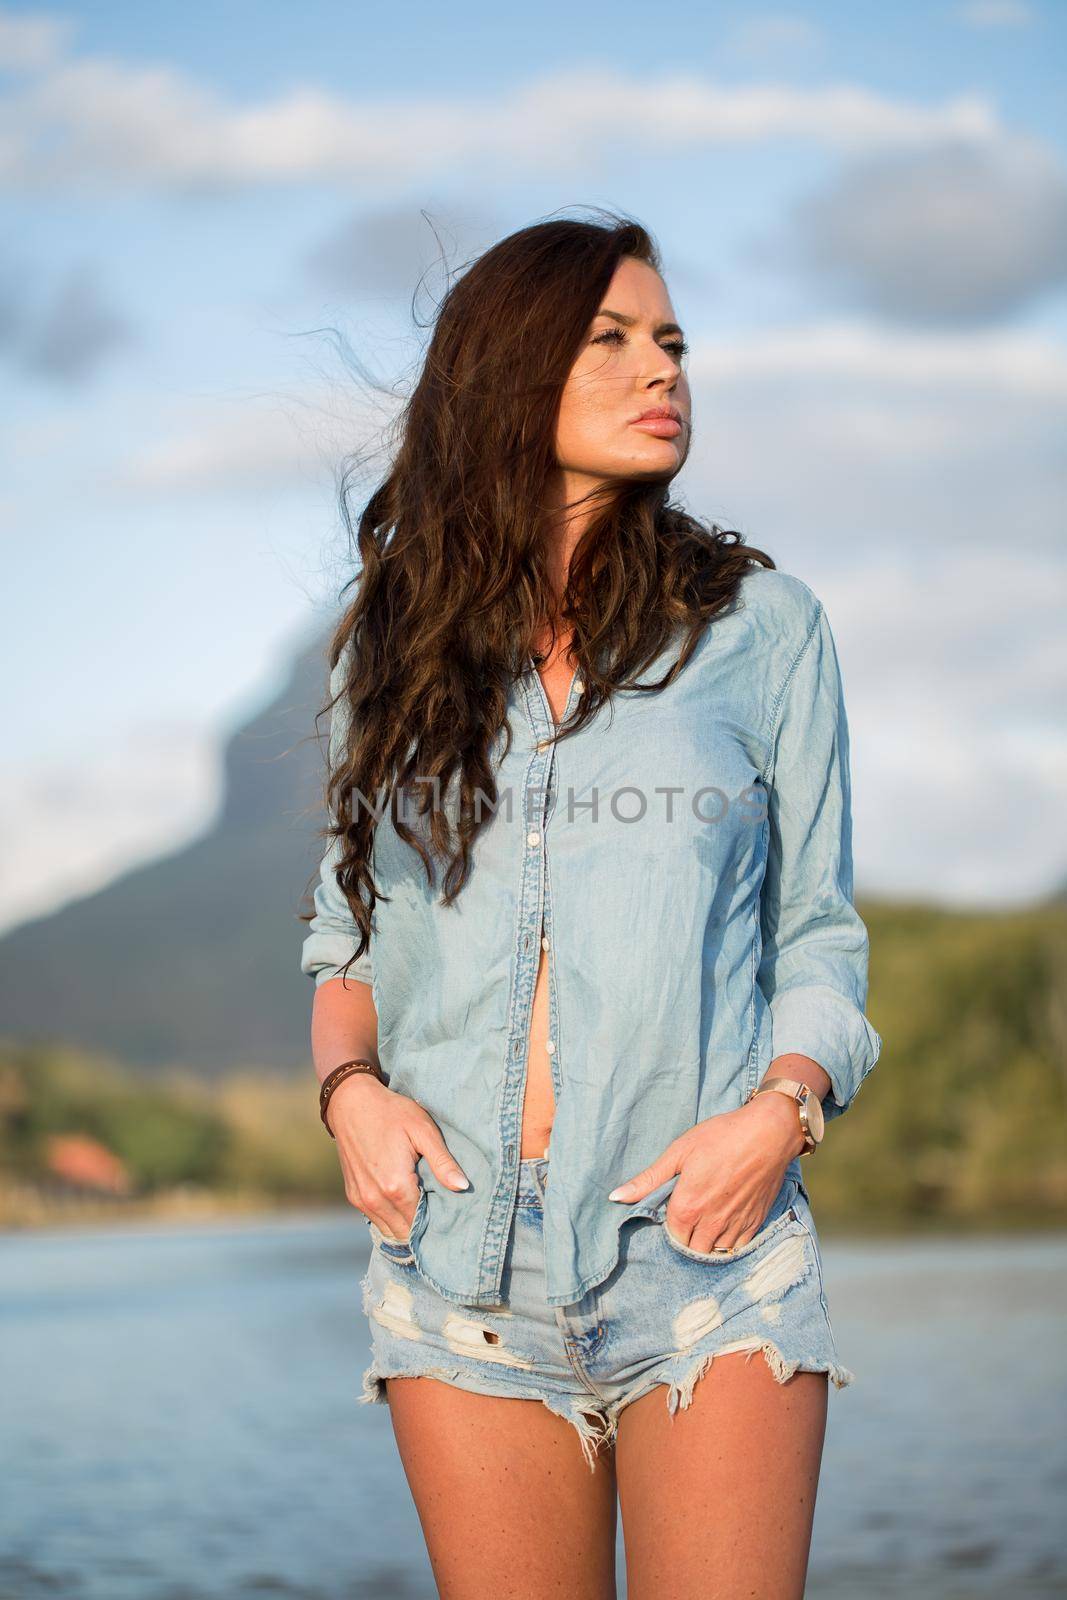 Young girl traveler stands on the beach against the mountain and enjoy the beauty of the sea landscape. Young girl loves wild life, travel, freedom.